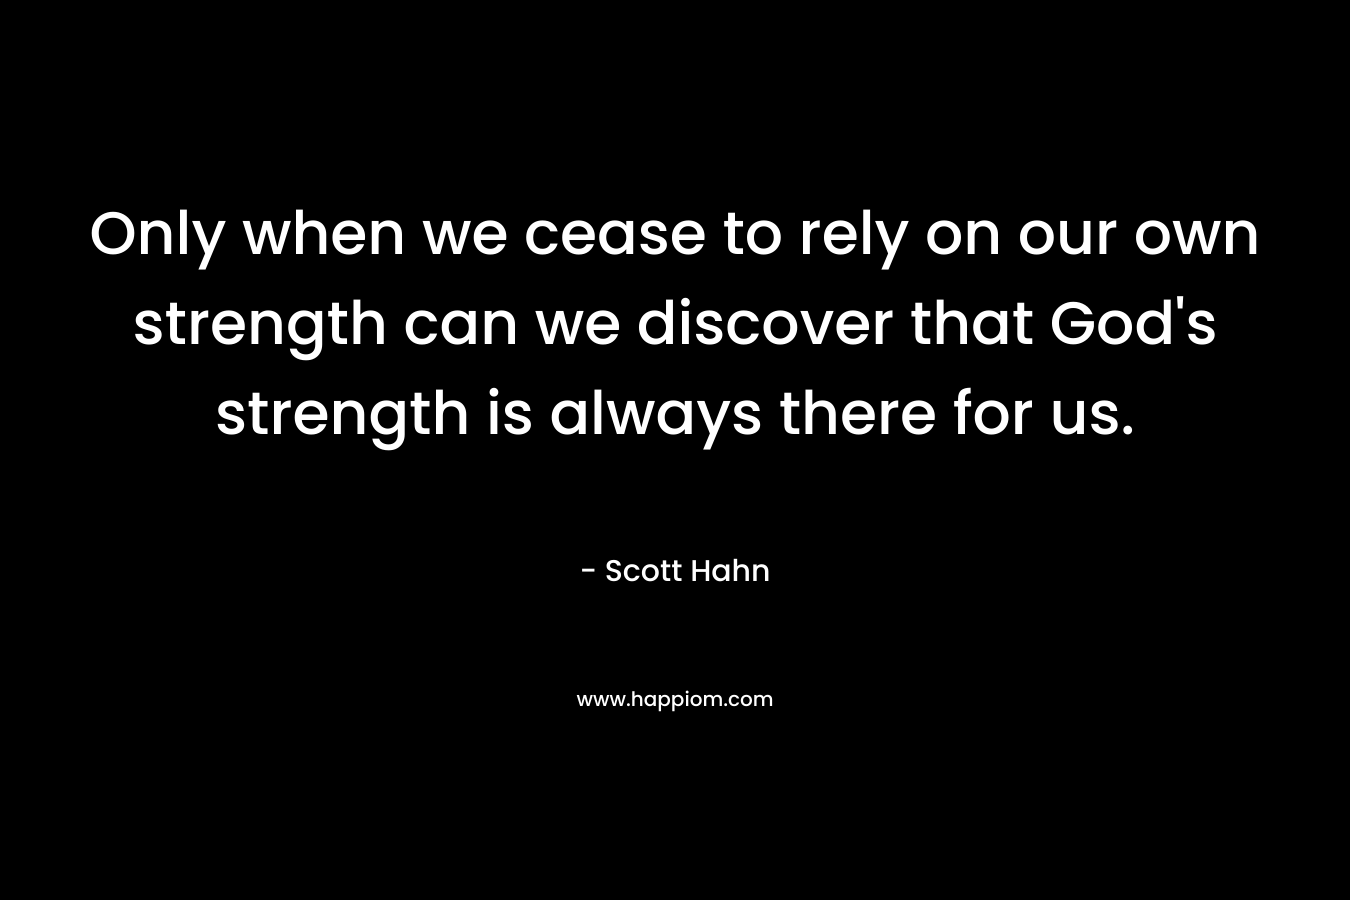 Only when we cease to rely on our own strength can we discover that God's strength is always there for us.